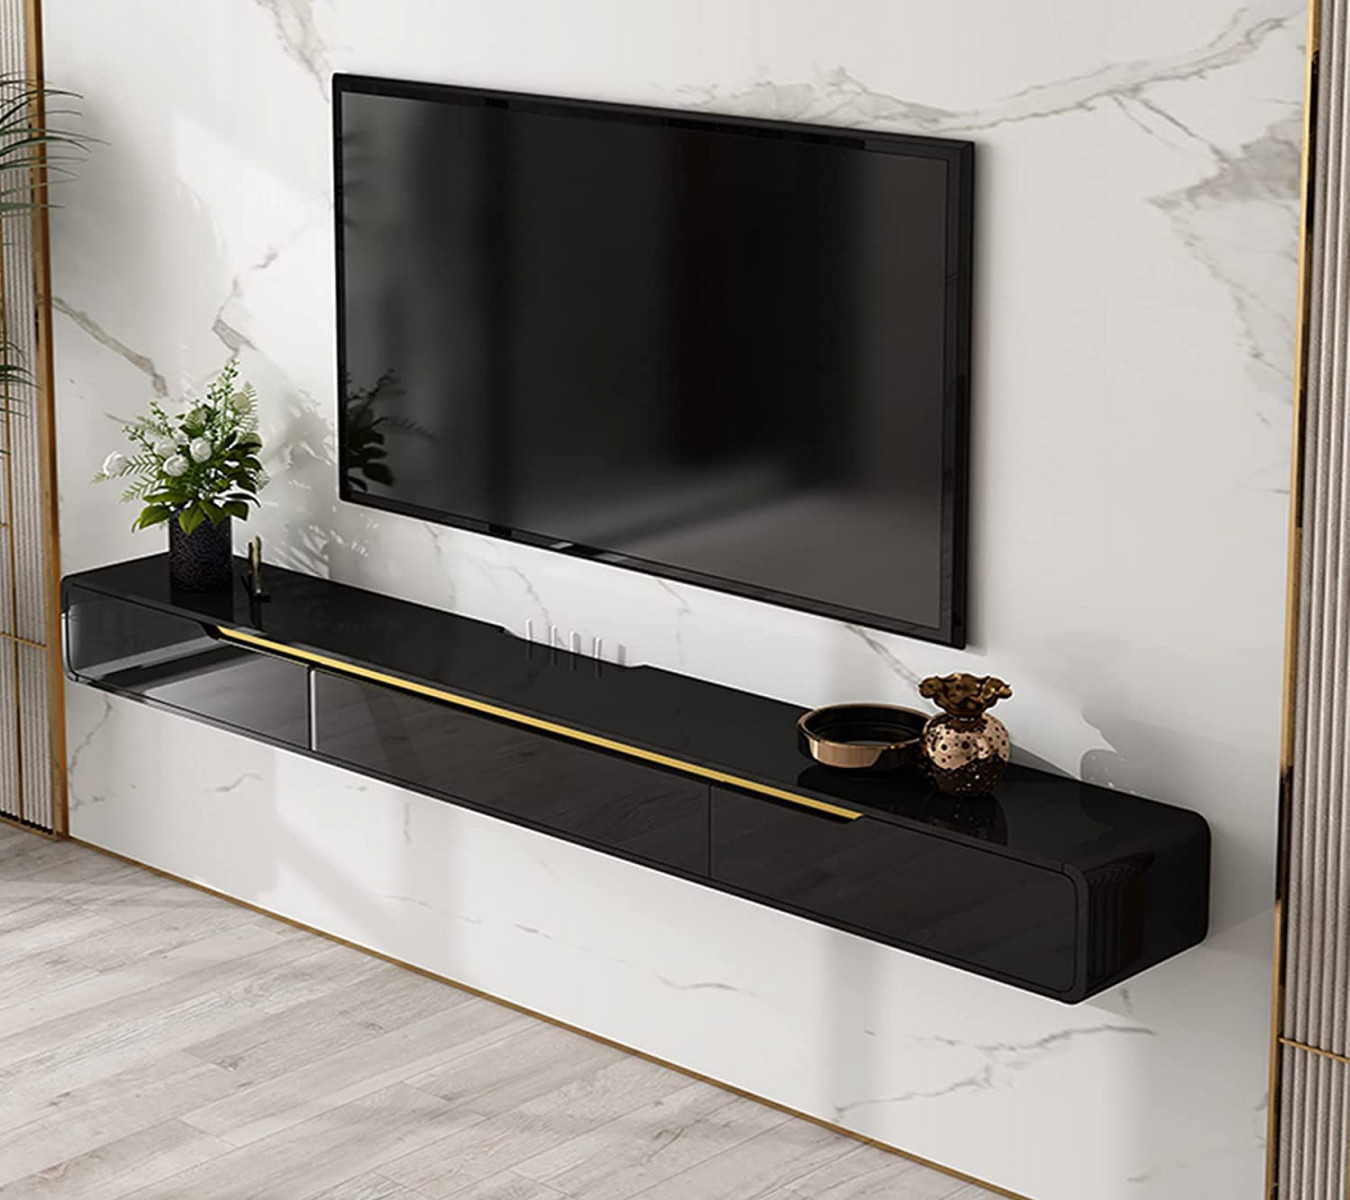 FPIGSHS TV Lowboard, TV Cabinet Modern TV Lowboard Board Hanging Wall  Multimedia Wall Shelf TV Cabinet Media Console Made of MDF Wood for Home  and